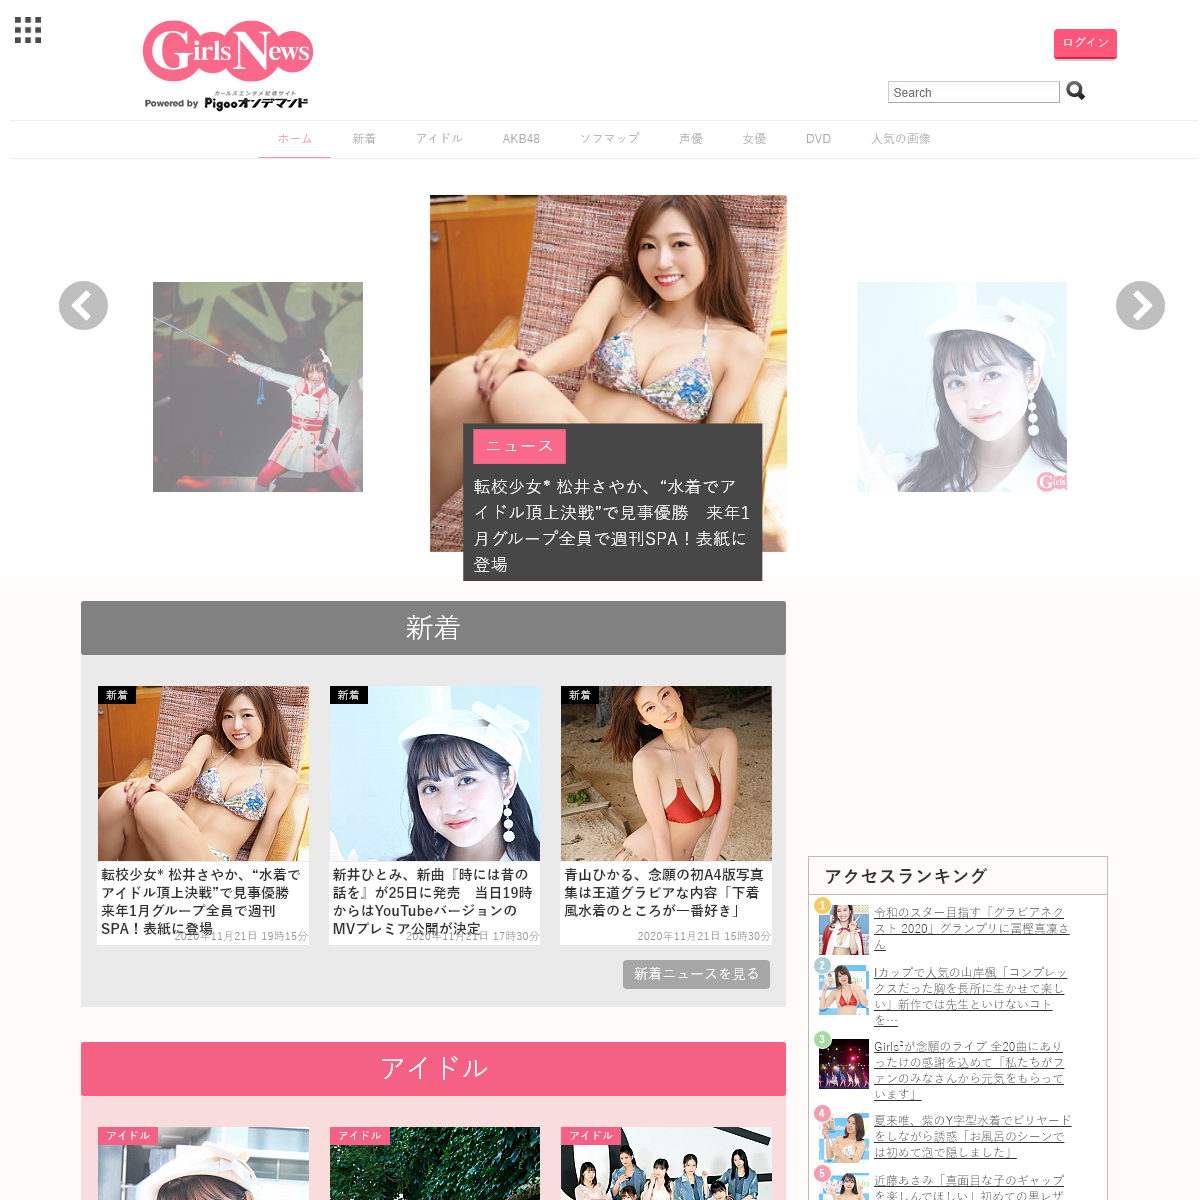 A complete backup of girlsnews.tv